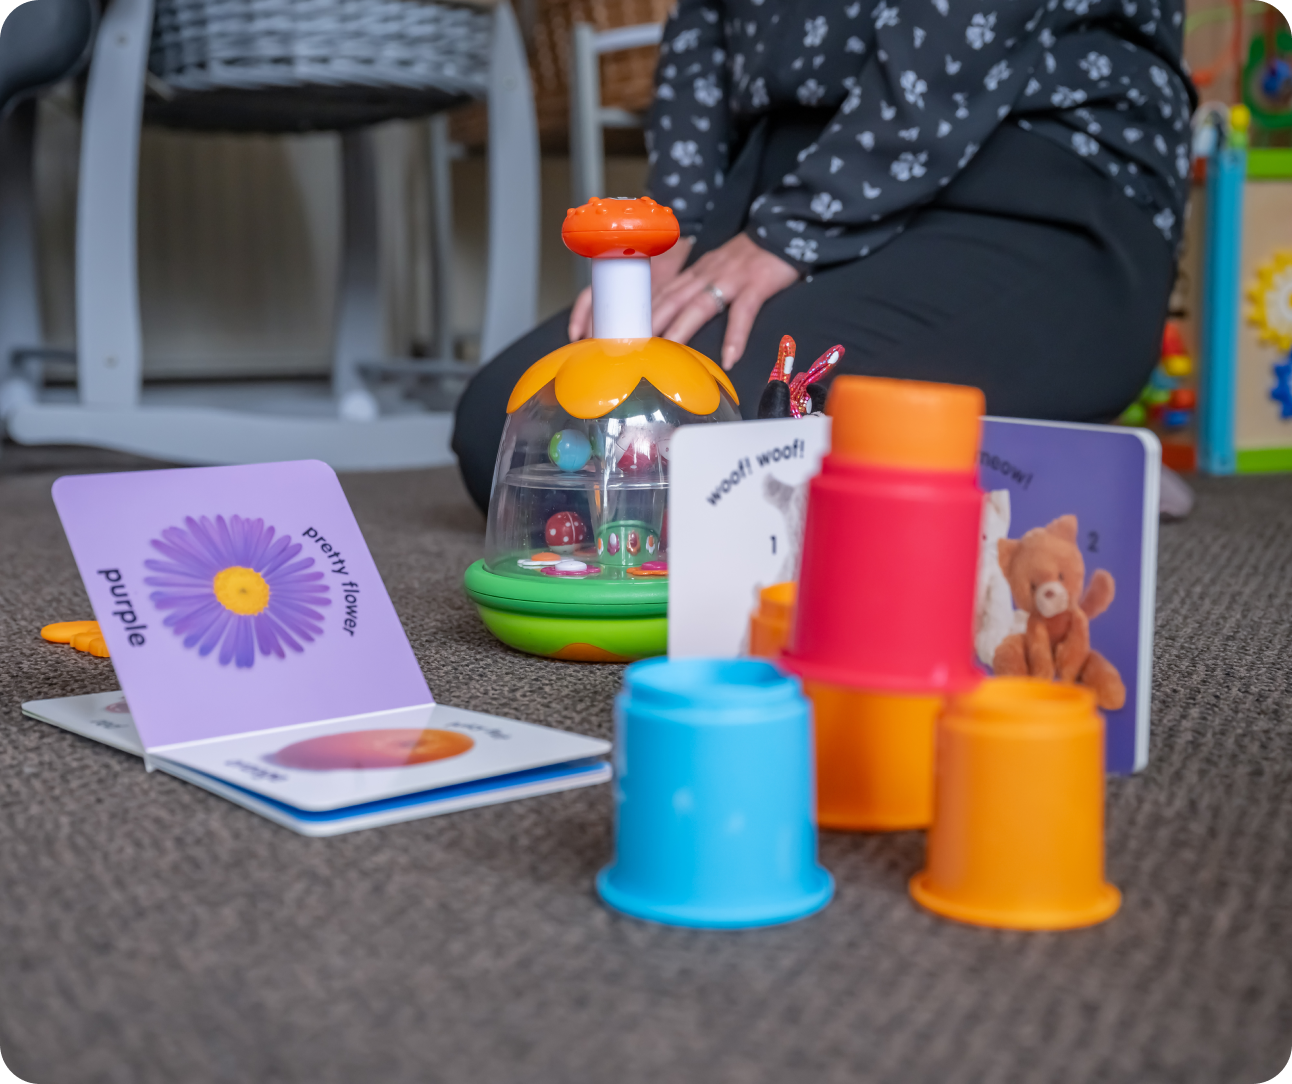 Young parents accommodation_ttoys on carpet including stacking cups and books